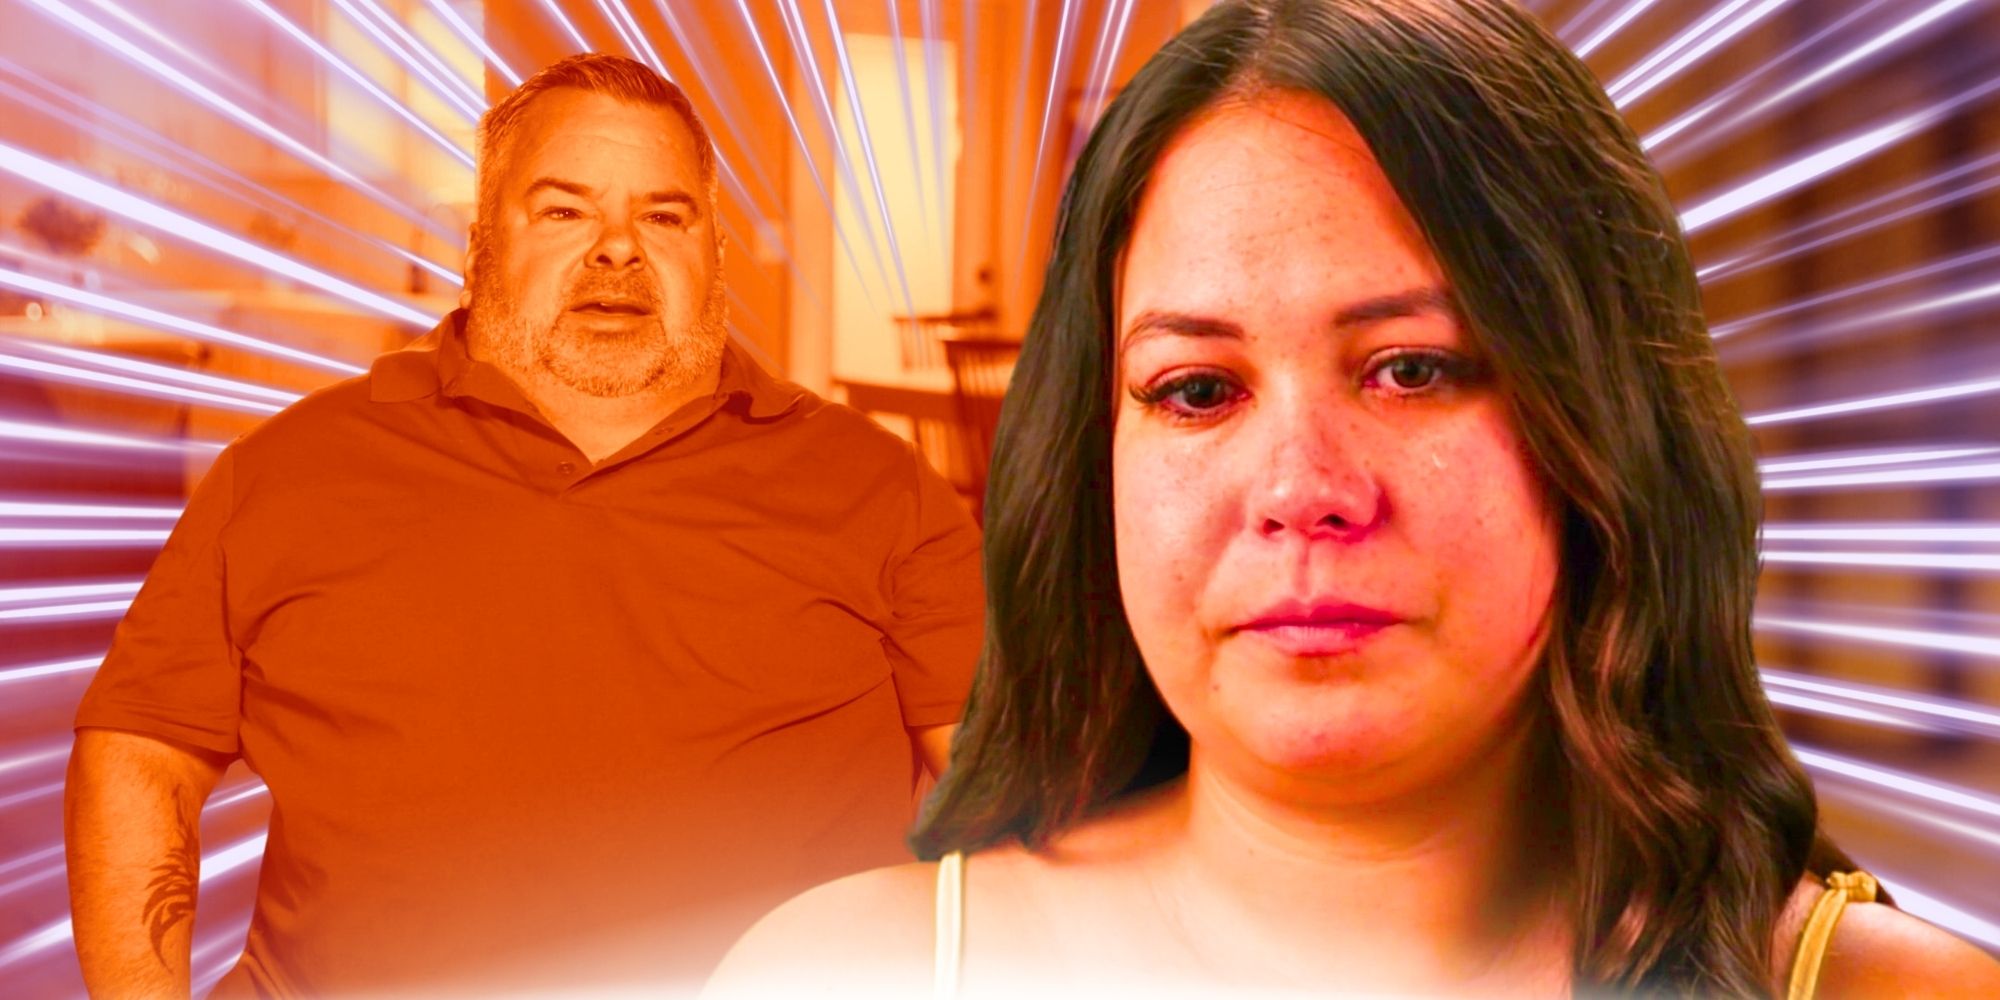 montage of Big Ed and liz Woods from 90 day fiance with Liz crying and Ed talking